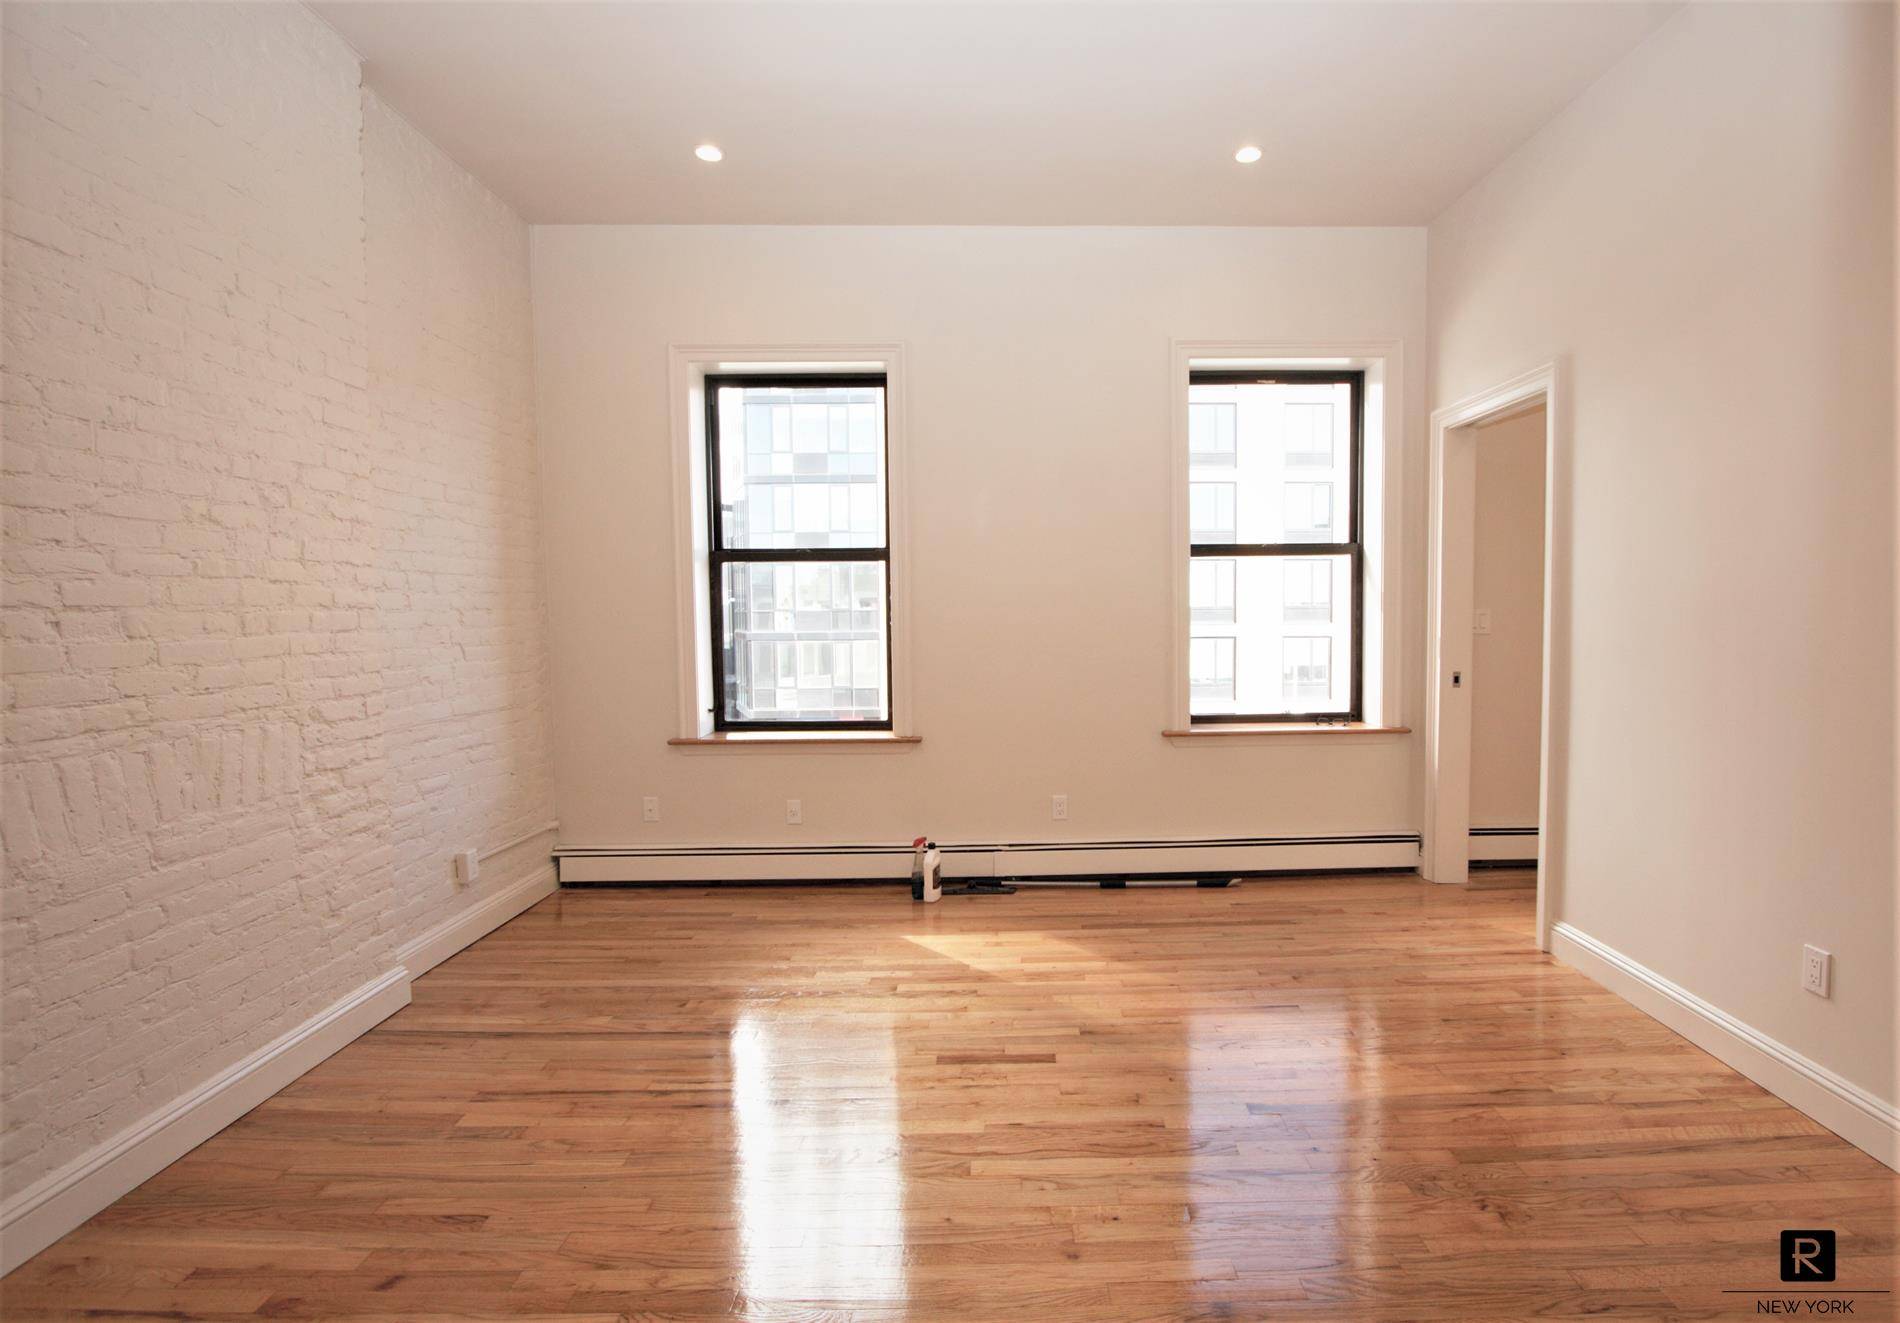 Brand New Pet Friendly Renovated Stylish 1 Bed Featuring a Brand New Stainless Kitchen complete with Dishwasher and Microwave, Hardwood Floors and Loftlike 11' Tall Ceilings throughout, Exposed Brick Walls, ...